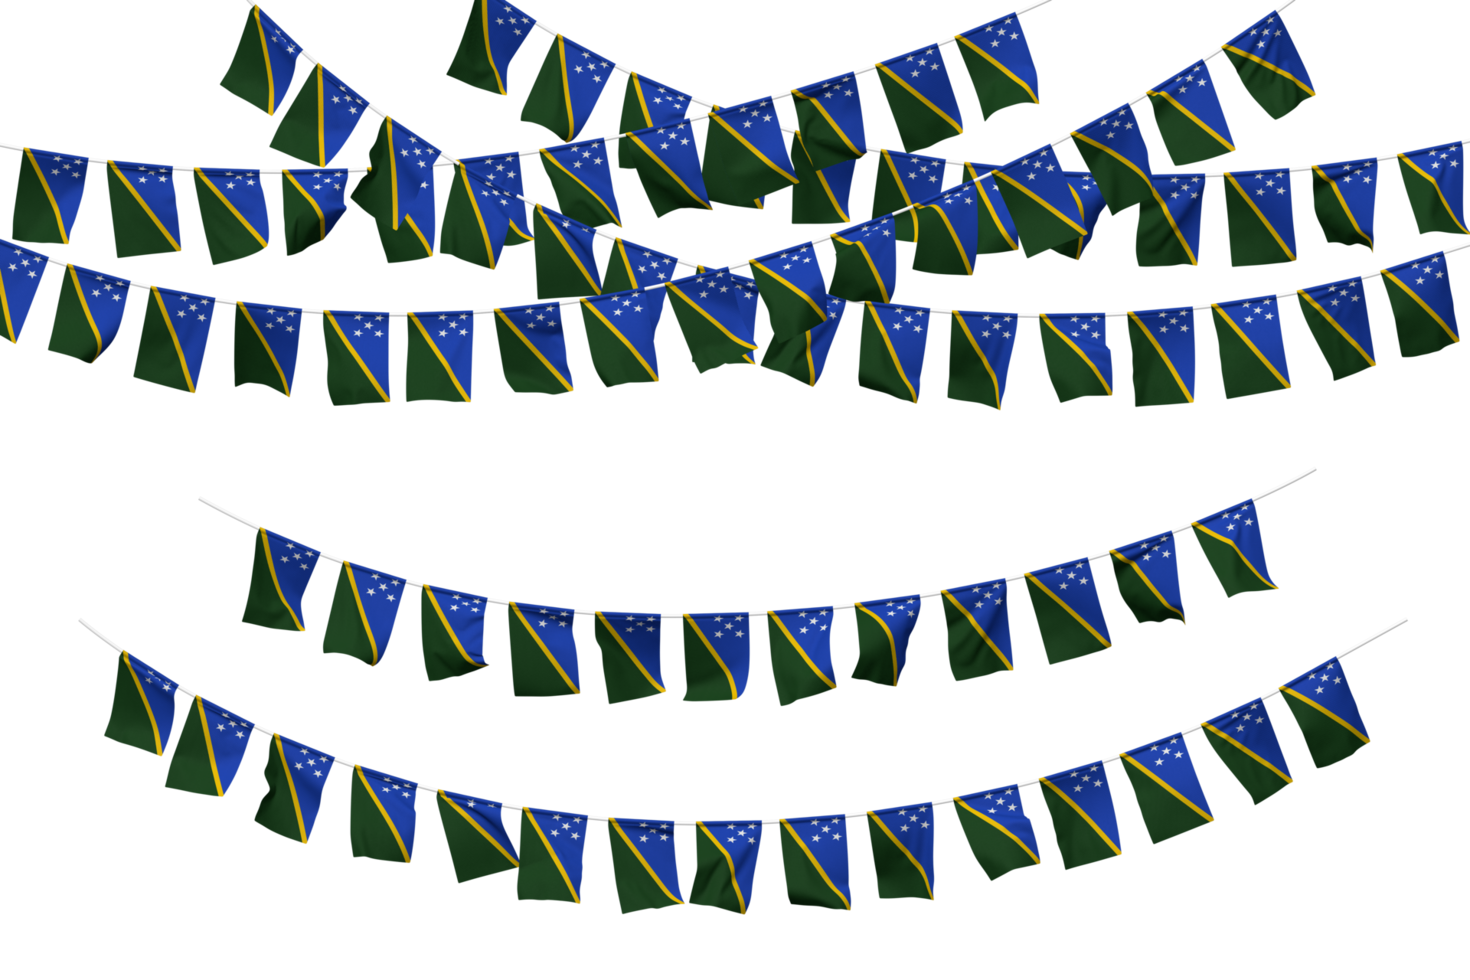 Solomon Islands Flag Bunting Decoration on The Rope, Jhandi, Set of Small Flag Celebration, 3D Rendering png